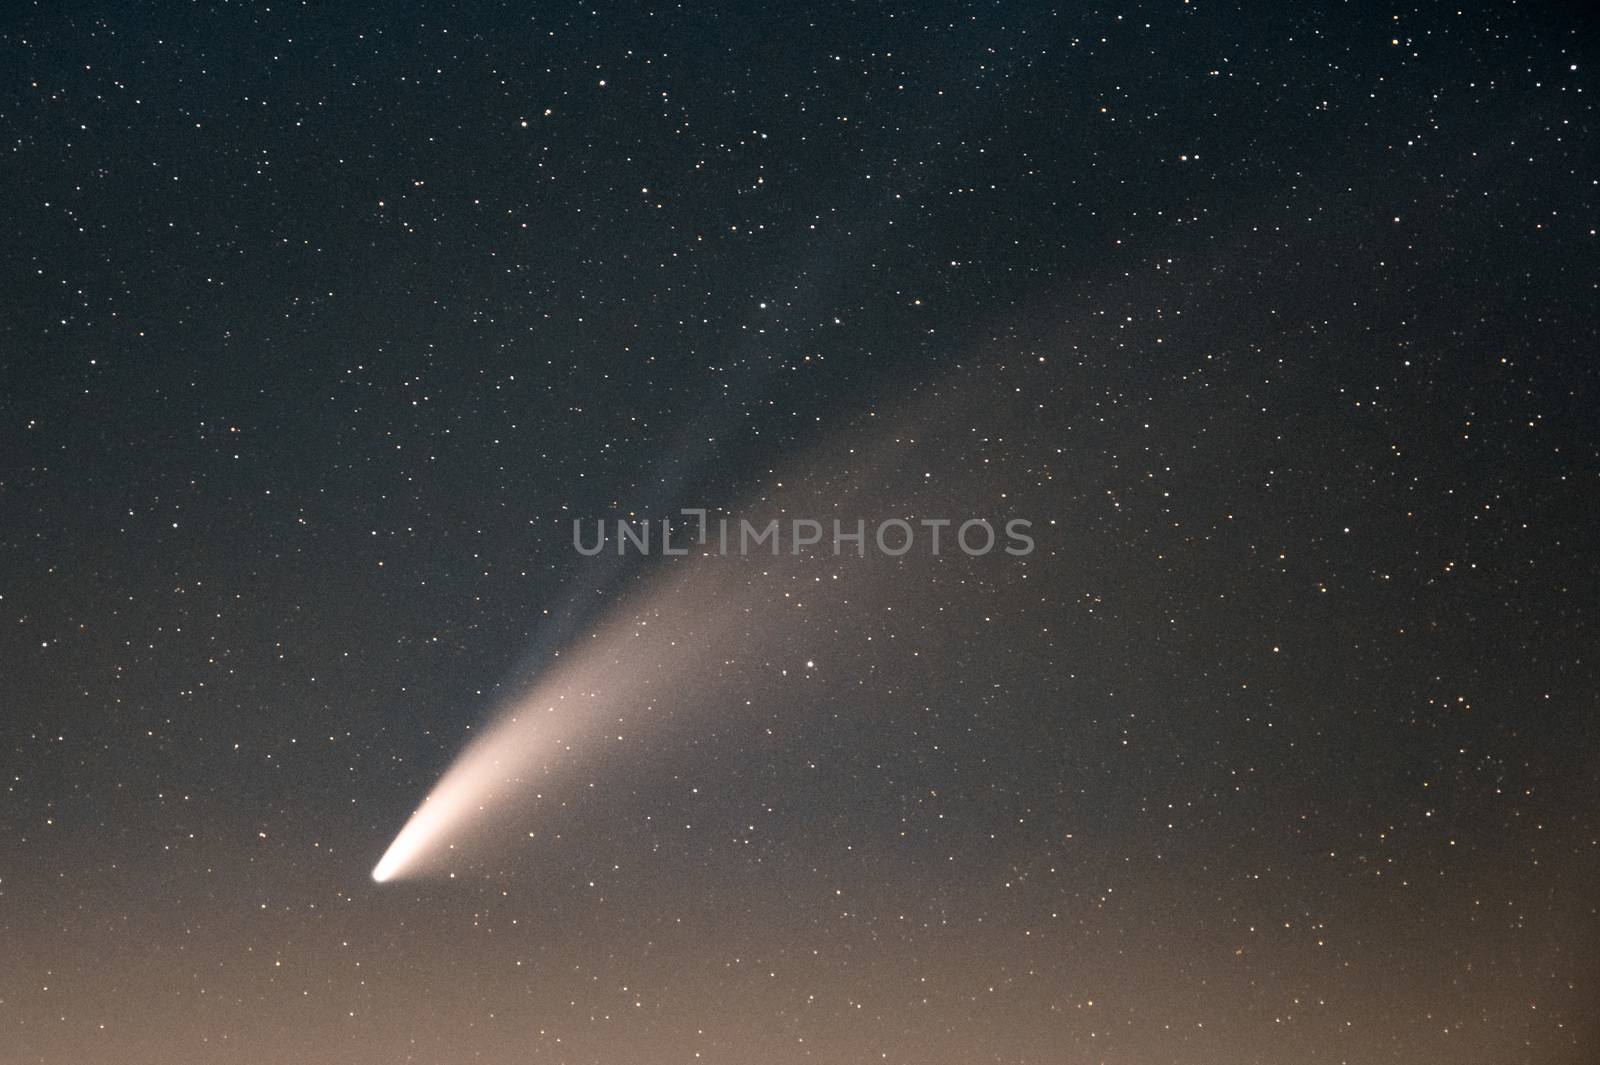 Neowise Comet and its long dust tail after dusk from Etna volcano by mauricallari